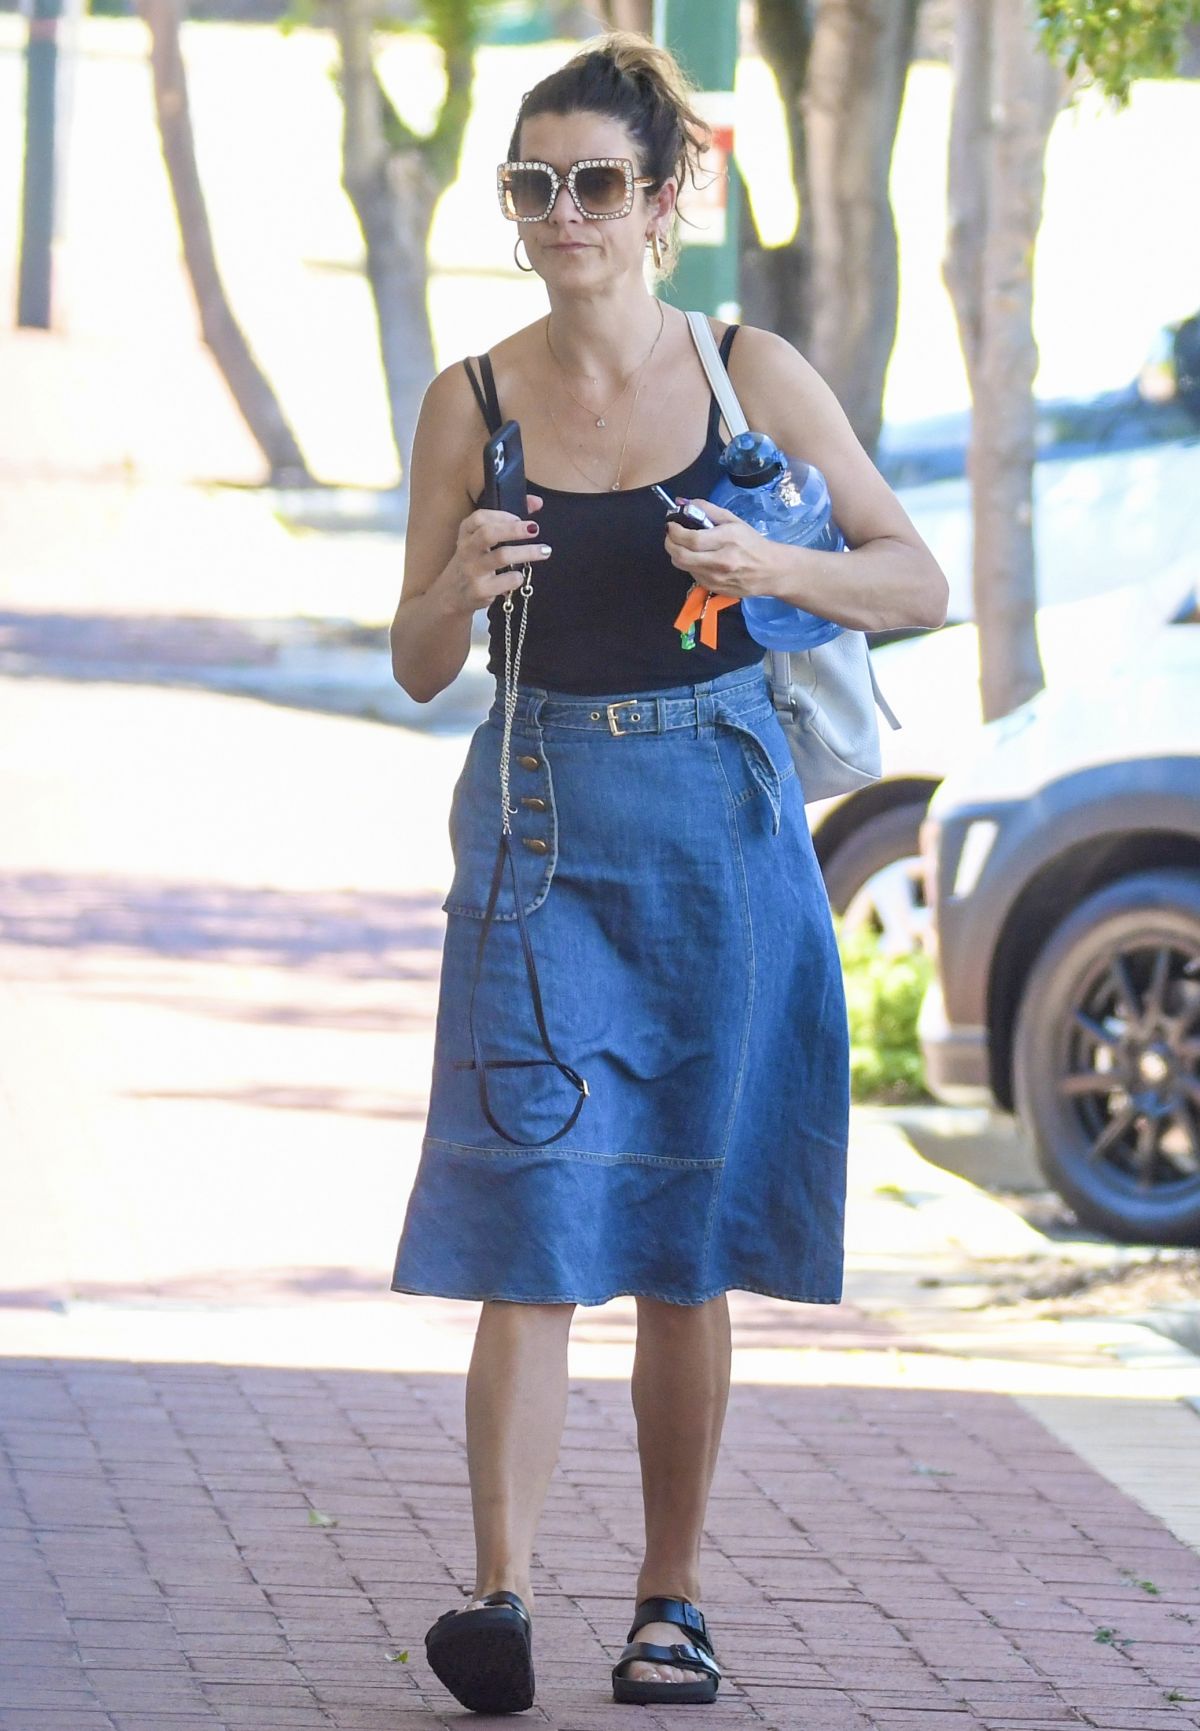 kate-walsh-out-and-about-in-perth-12-20-2020-6.jpg